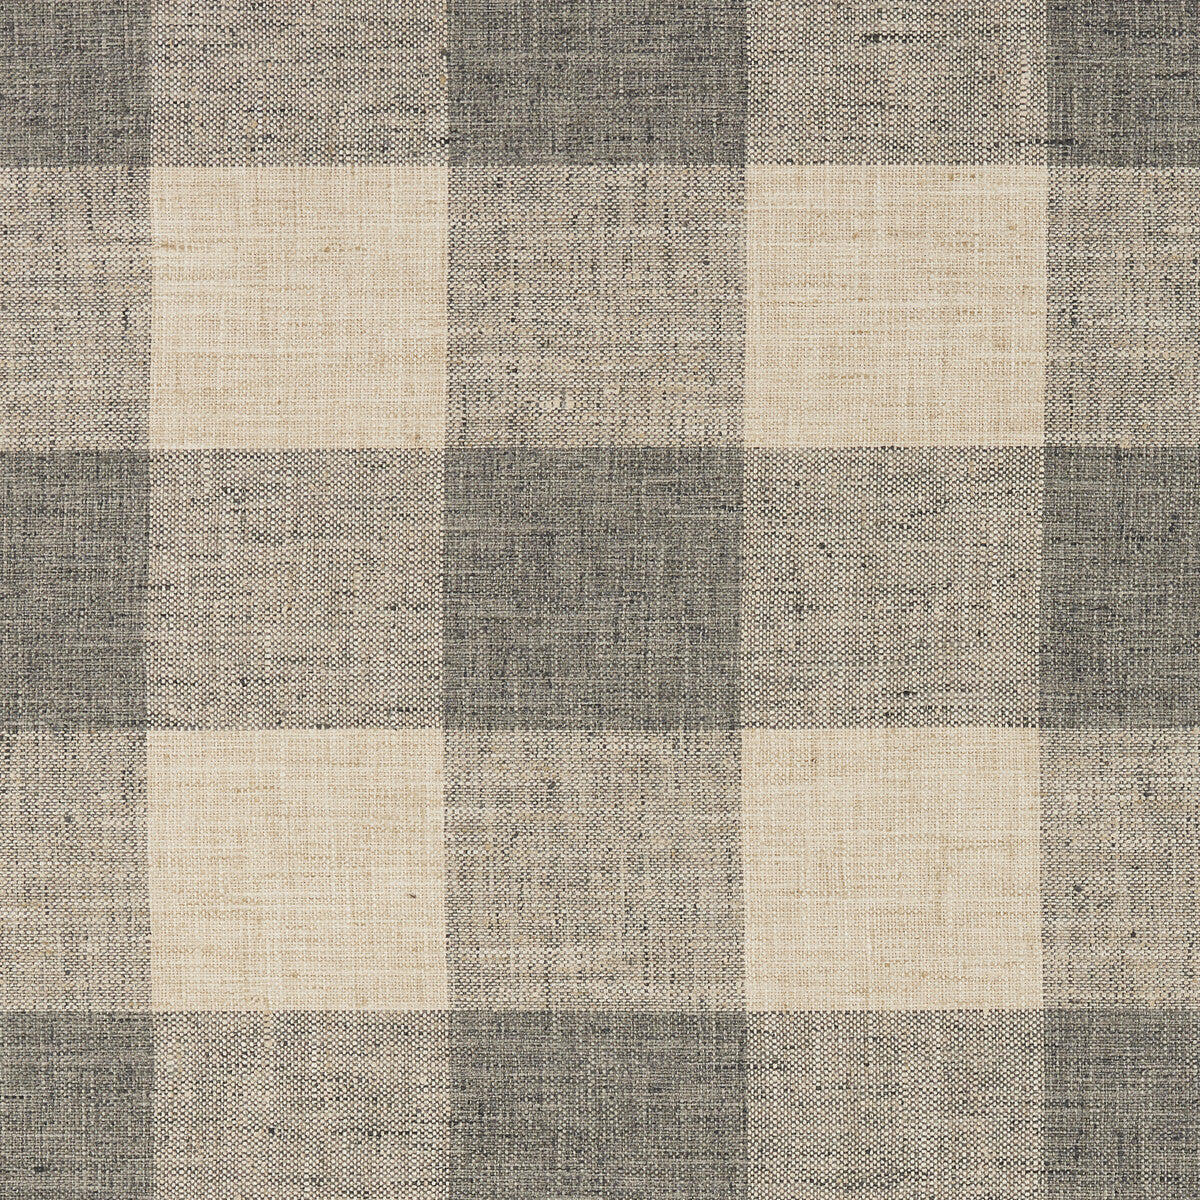 Kravet Basics fabric in 34090-11 color - pattern 34090.11.0 - by Kravet Basics in the Bungalow Chic II collection